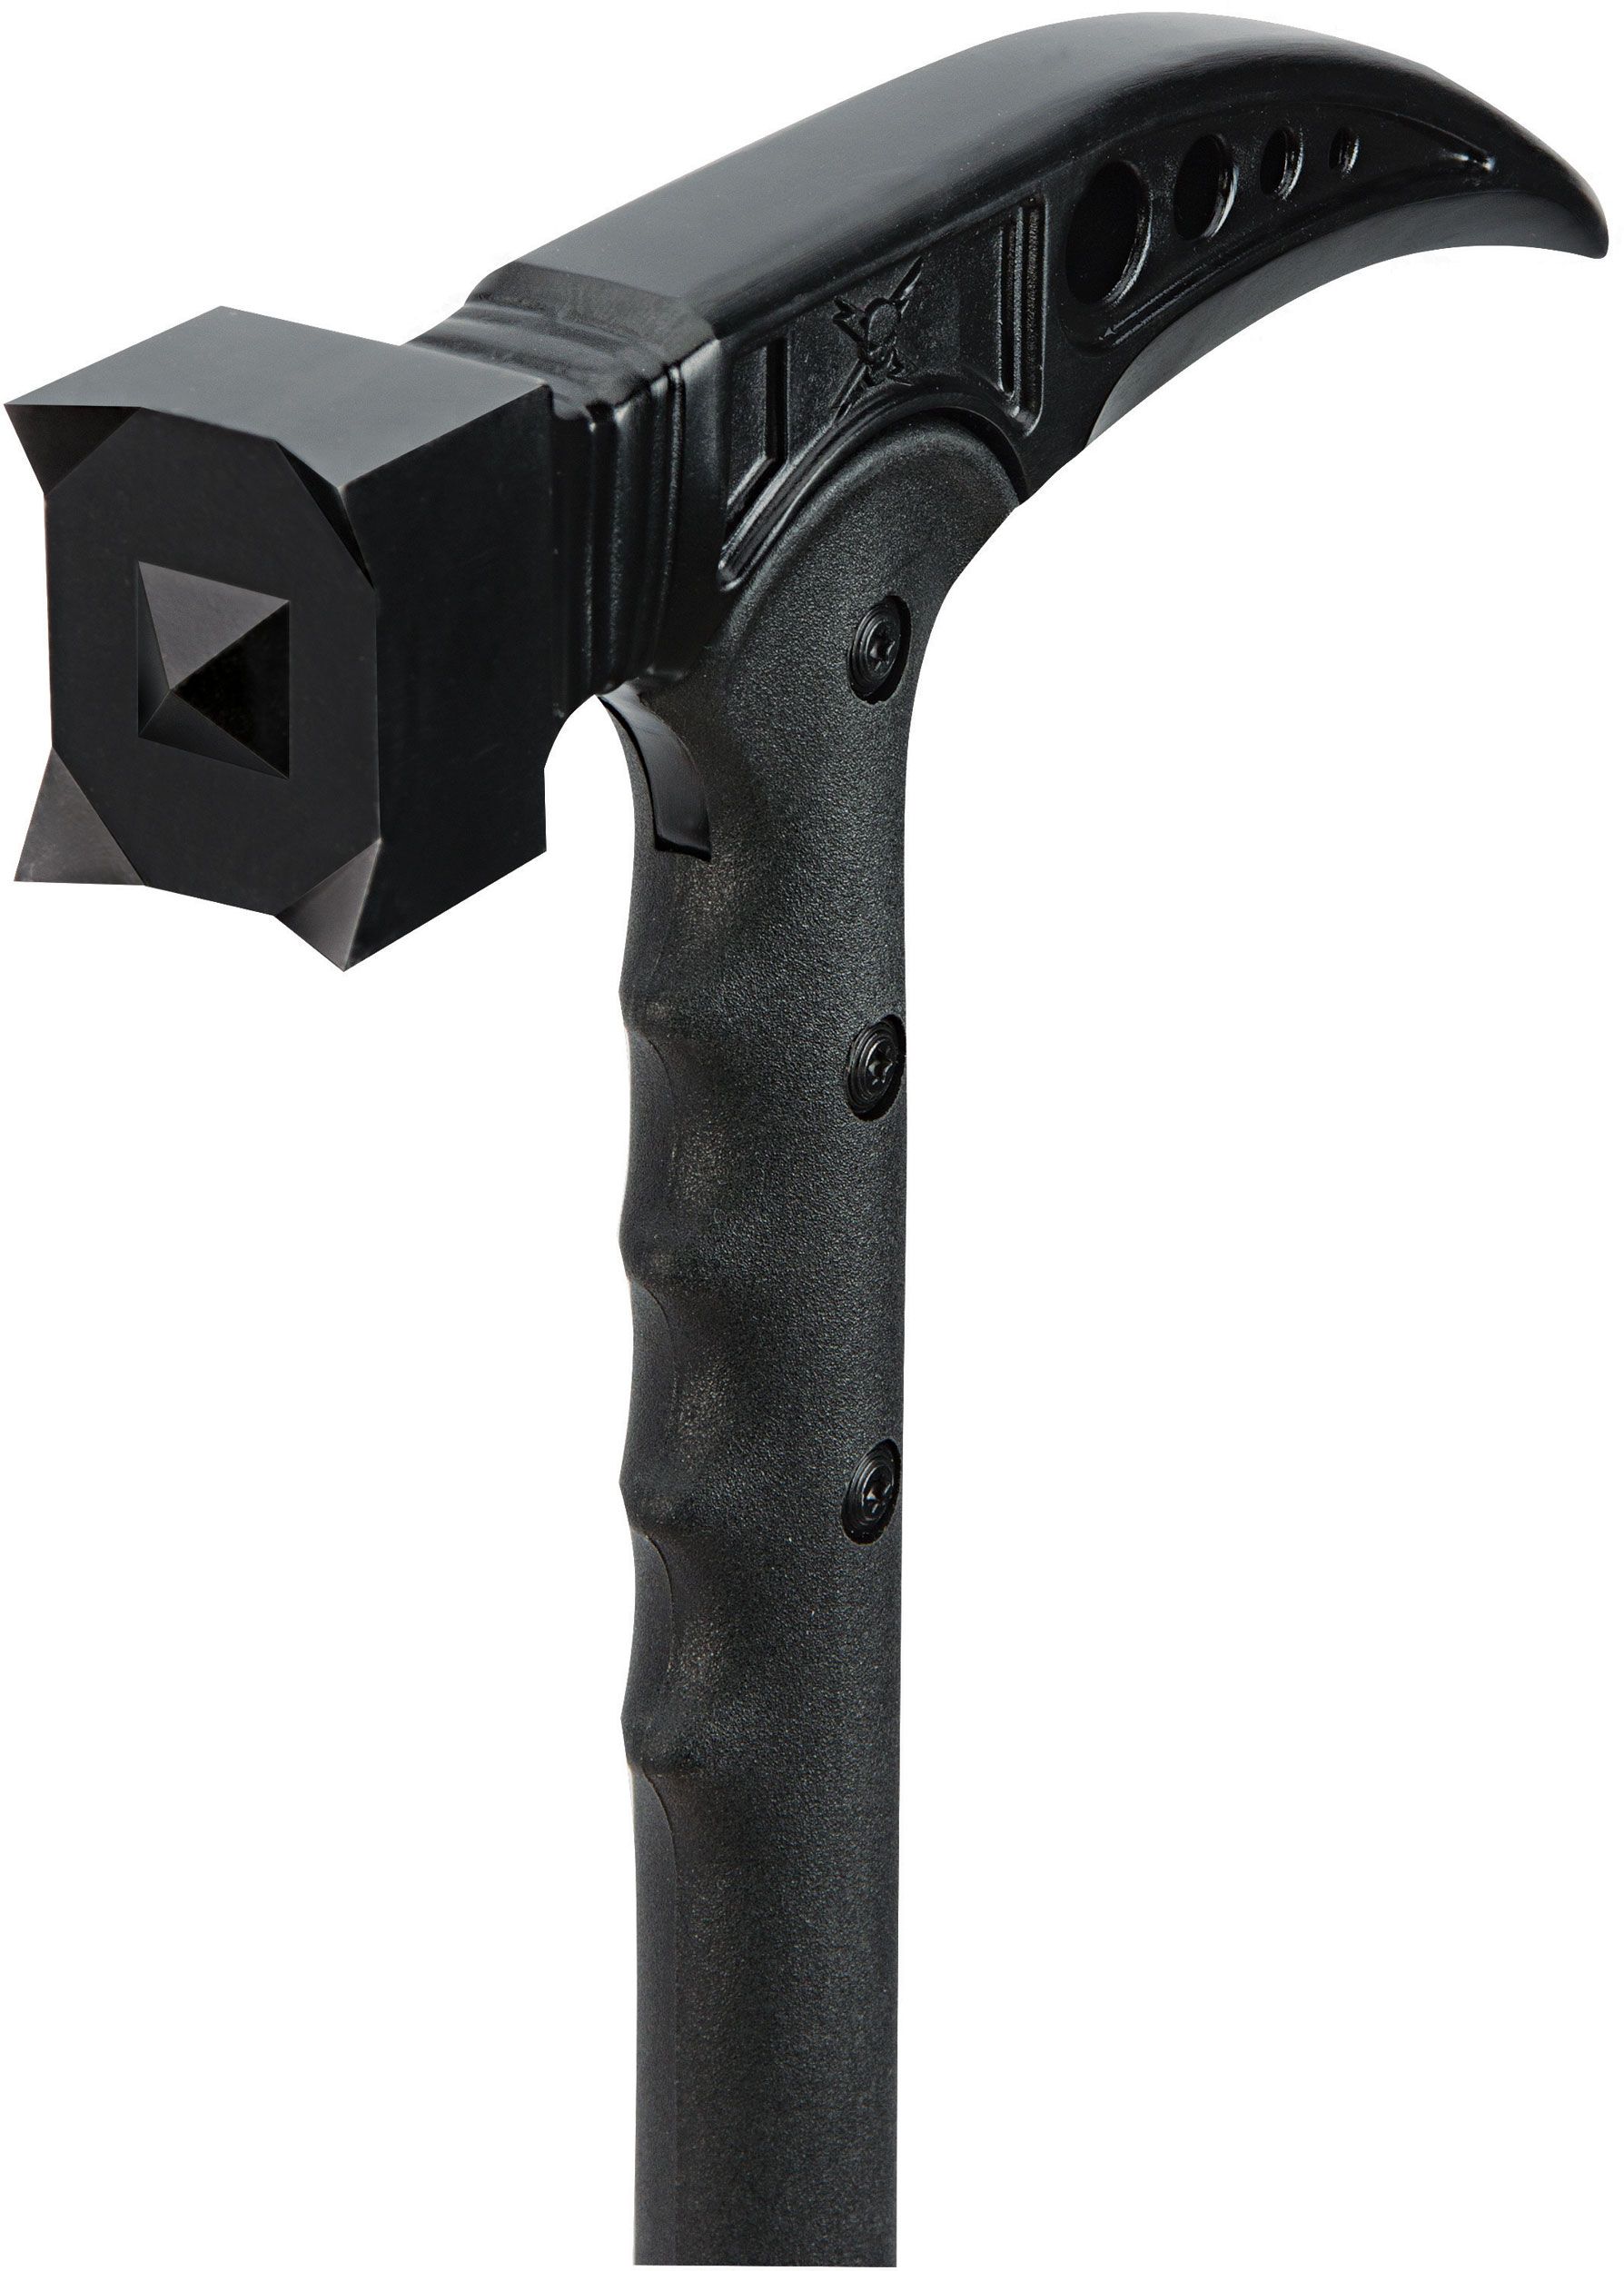 New M48 Kommando Tactical Survival Hammer Walking Stick By United Cutlery UC2960 